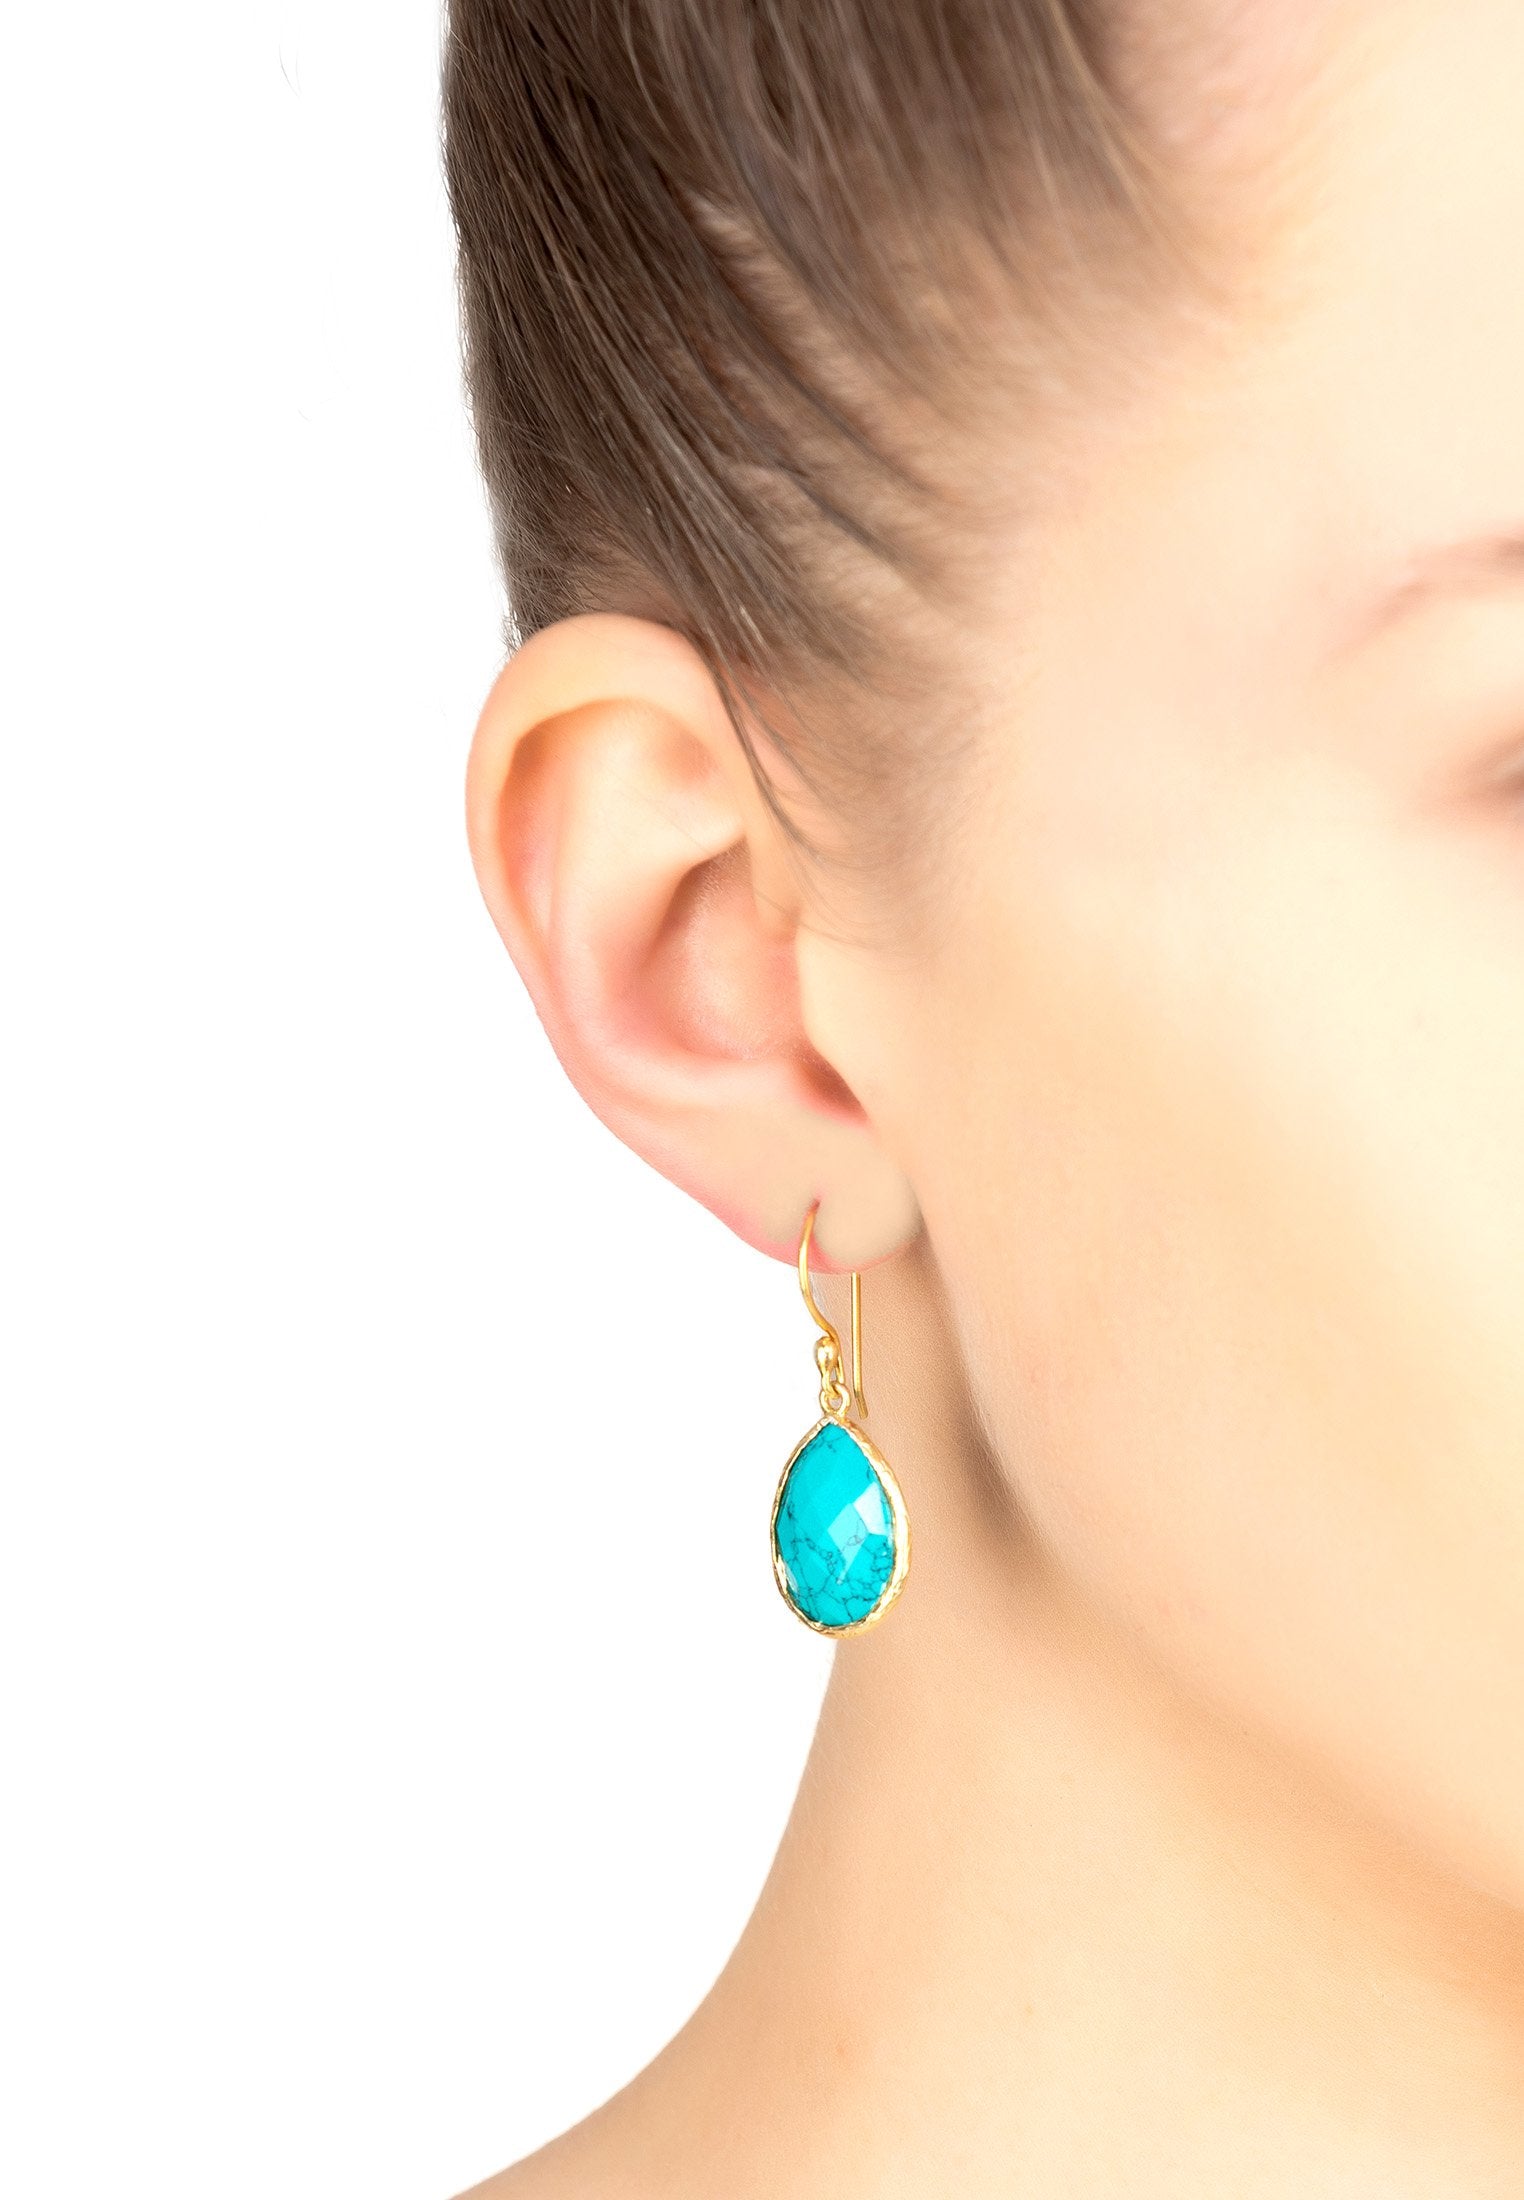 Turquoise Petite Drop Earrings in Gold - Handcrafted Gemstone Jewelry - Jewelry & Watches - Bijou Her -  -  - 